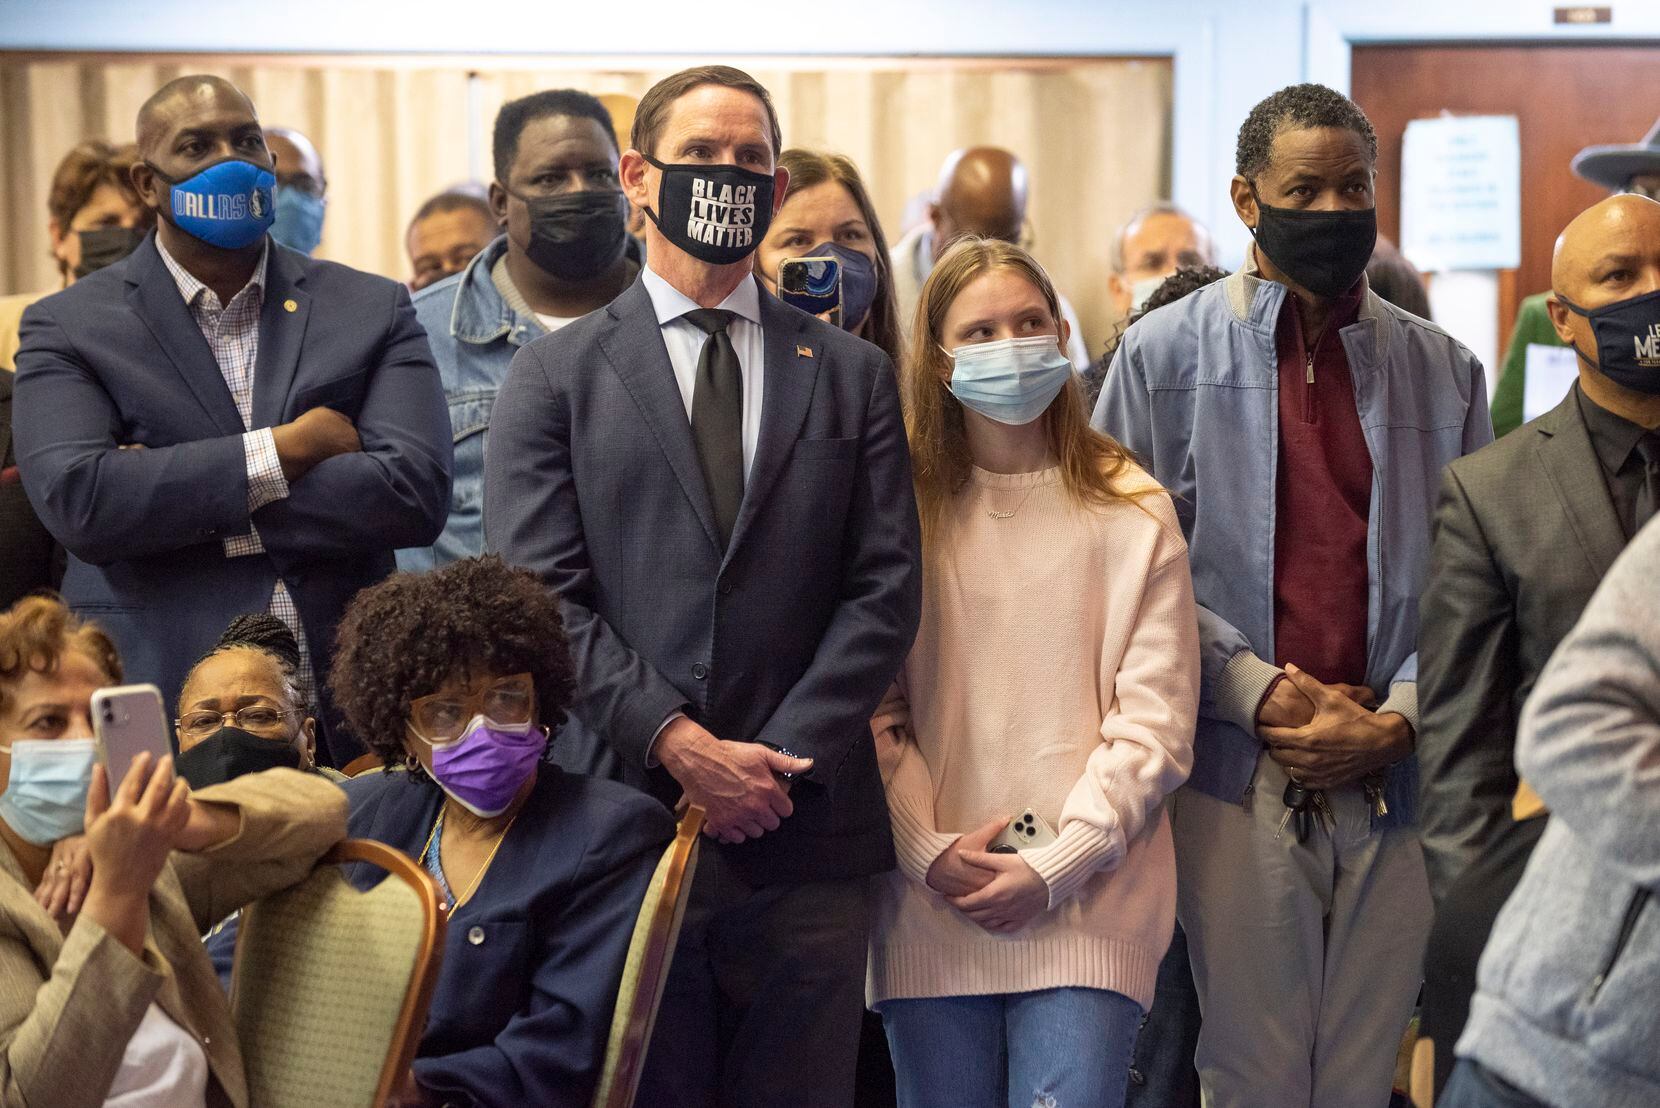 Dallas County Judge Clay Jenkins, wearing a Black Lives Matter mask, stands next to his...